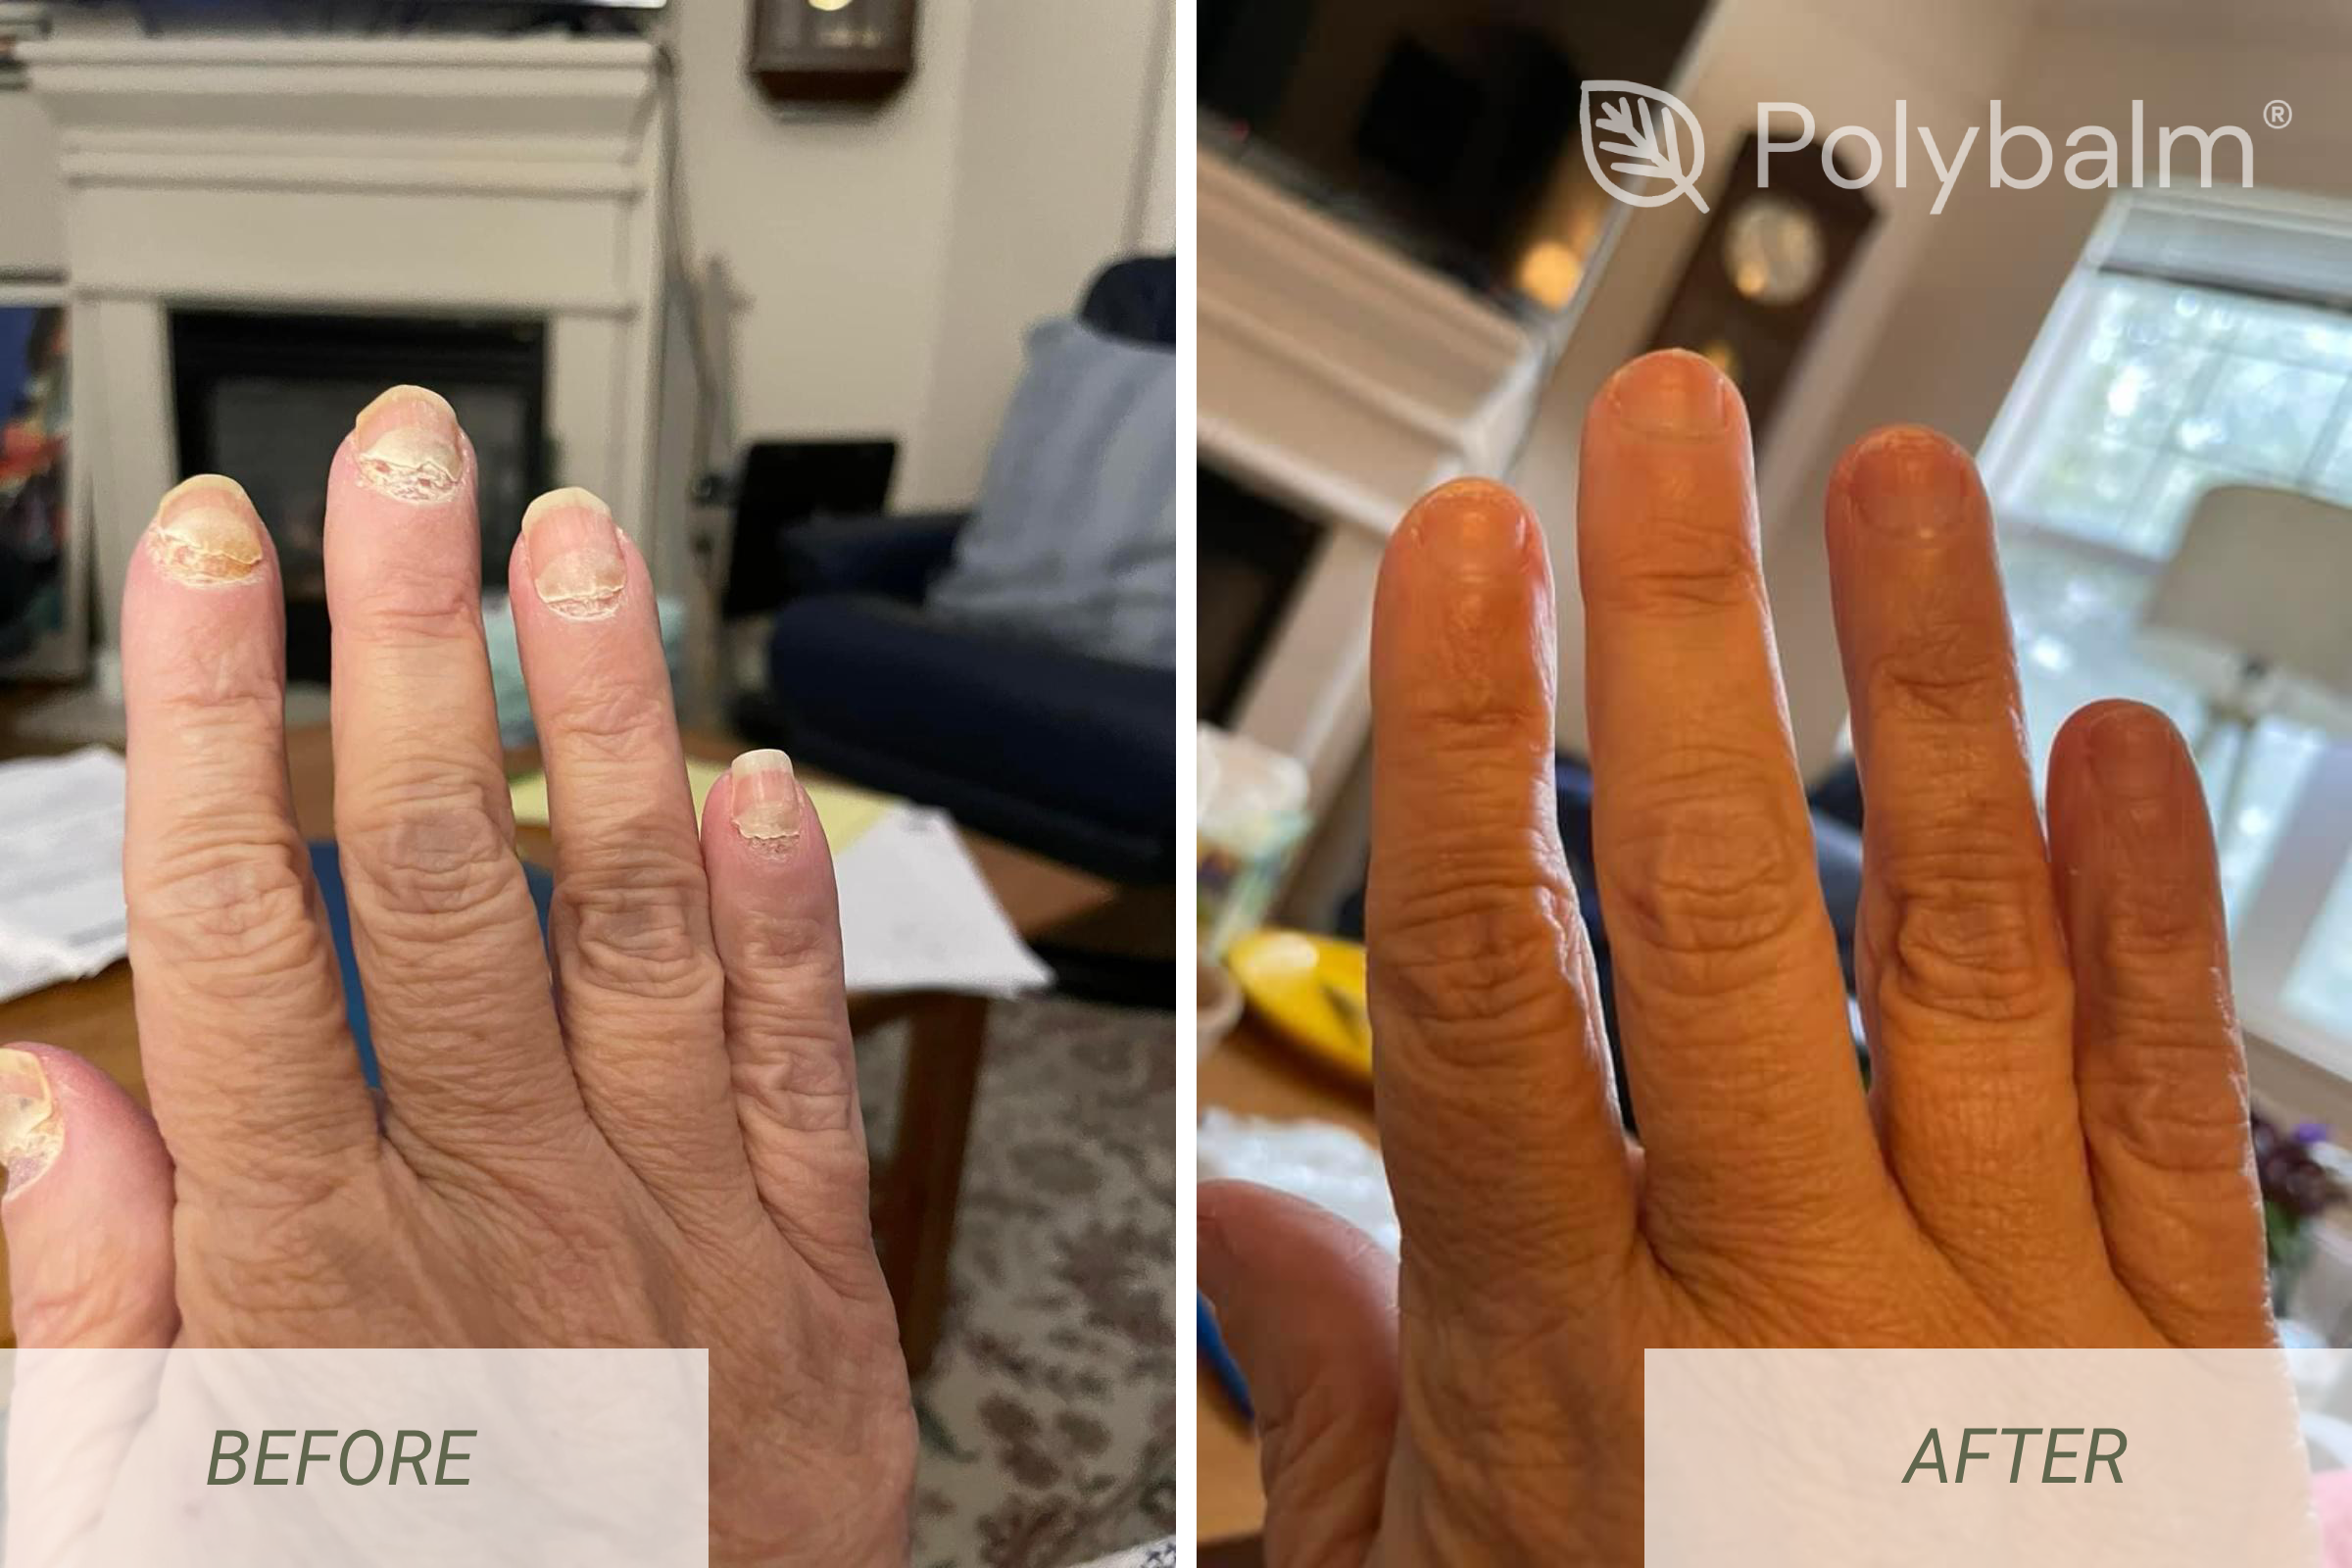 Before vs After using Polybalm®